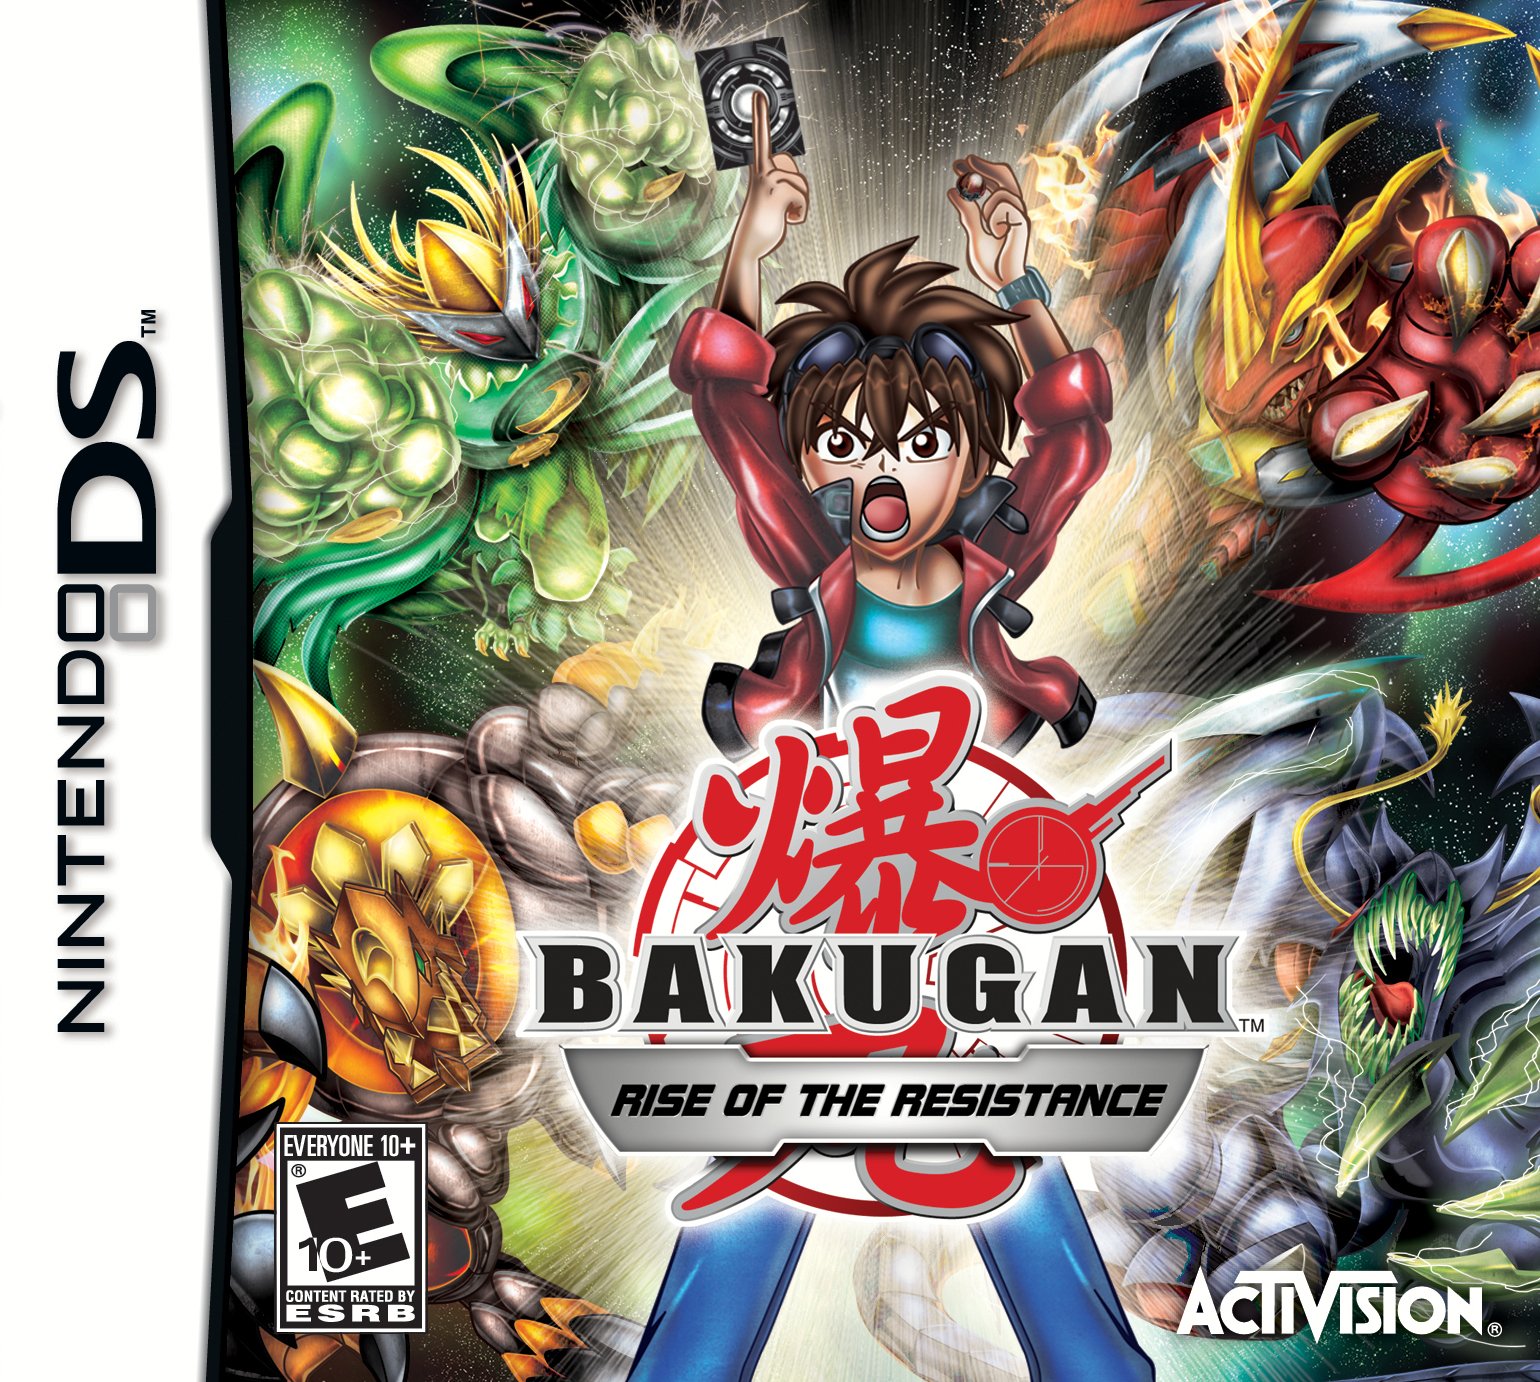 Image of Bakugan: Rise of the Resistance